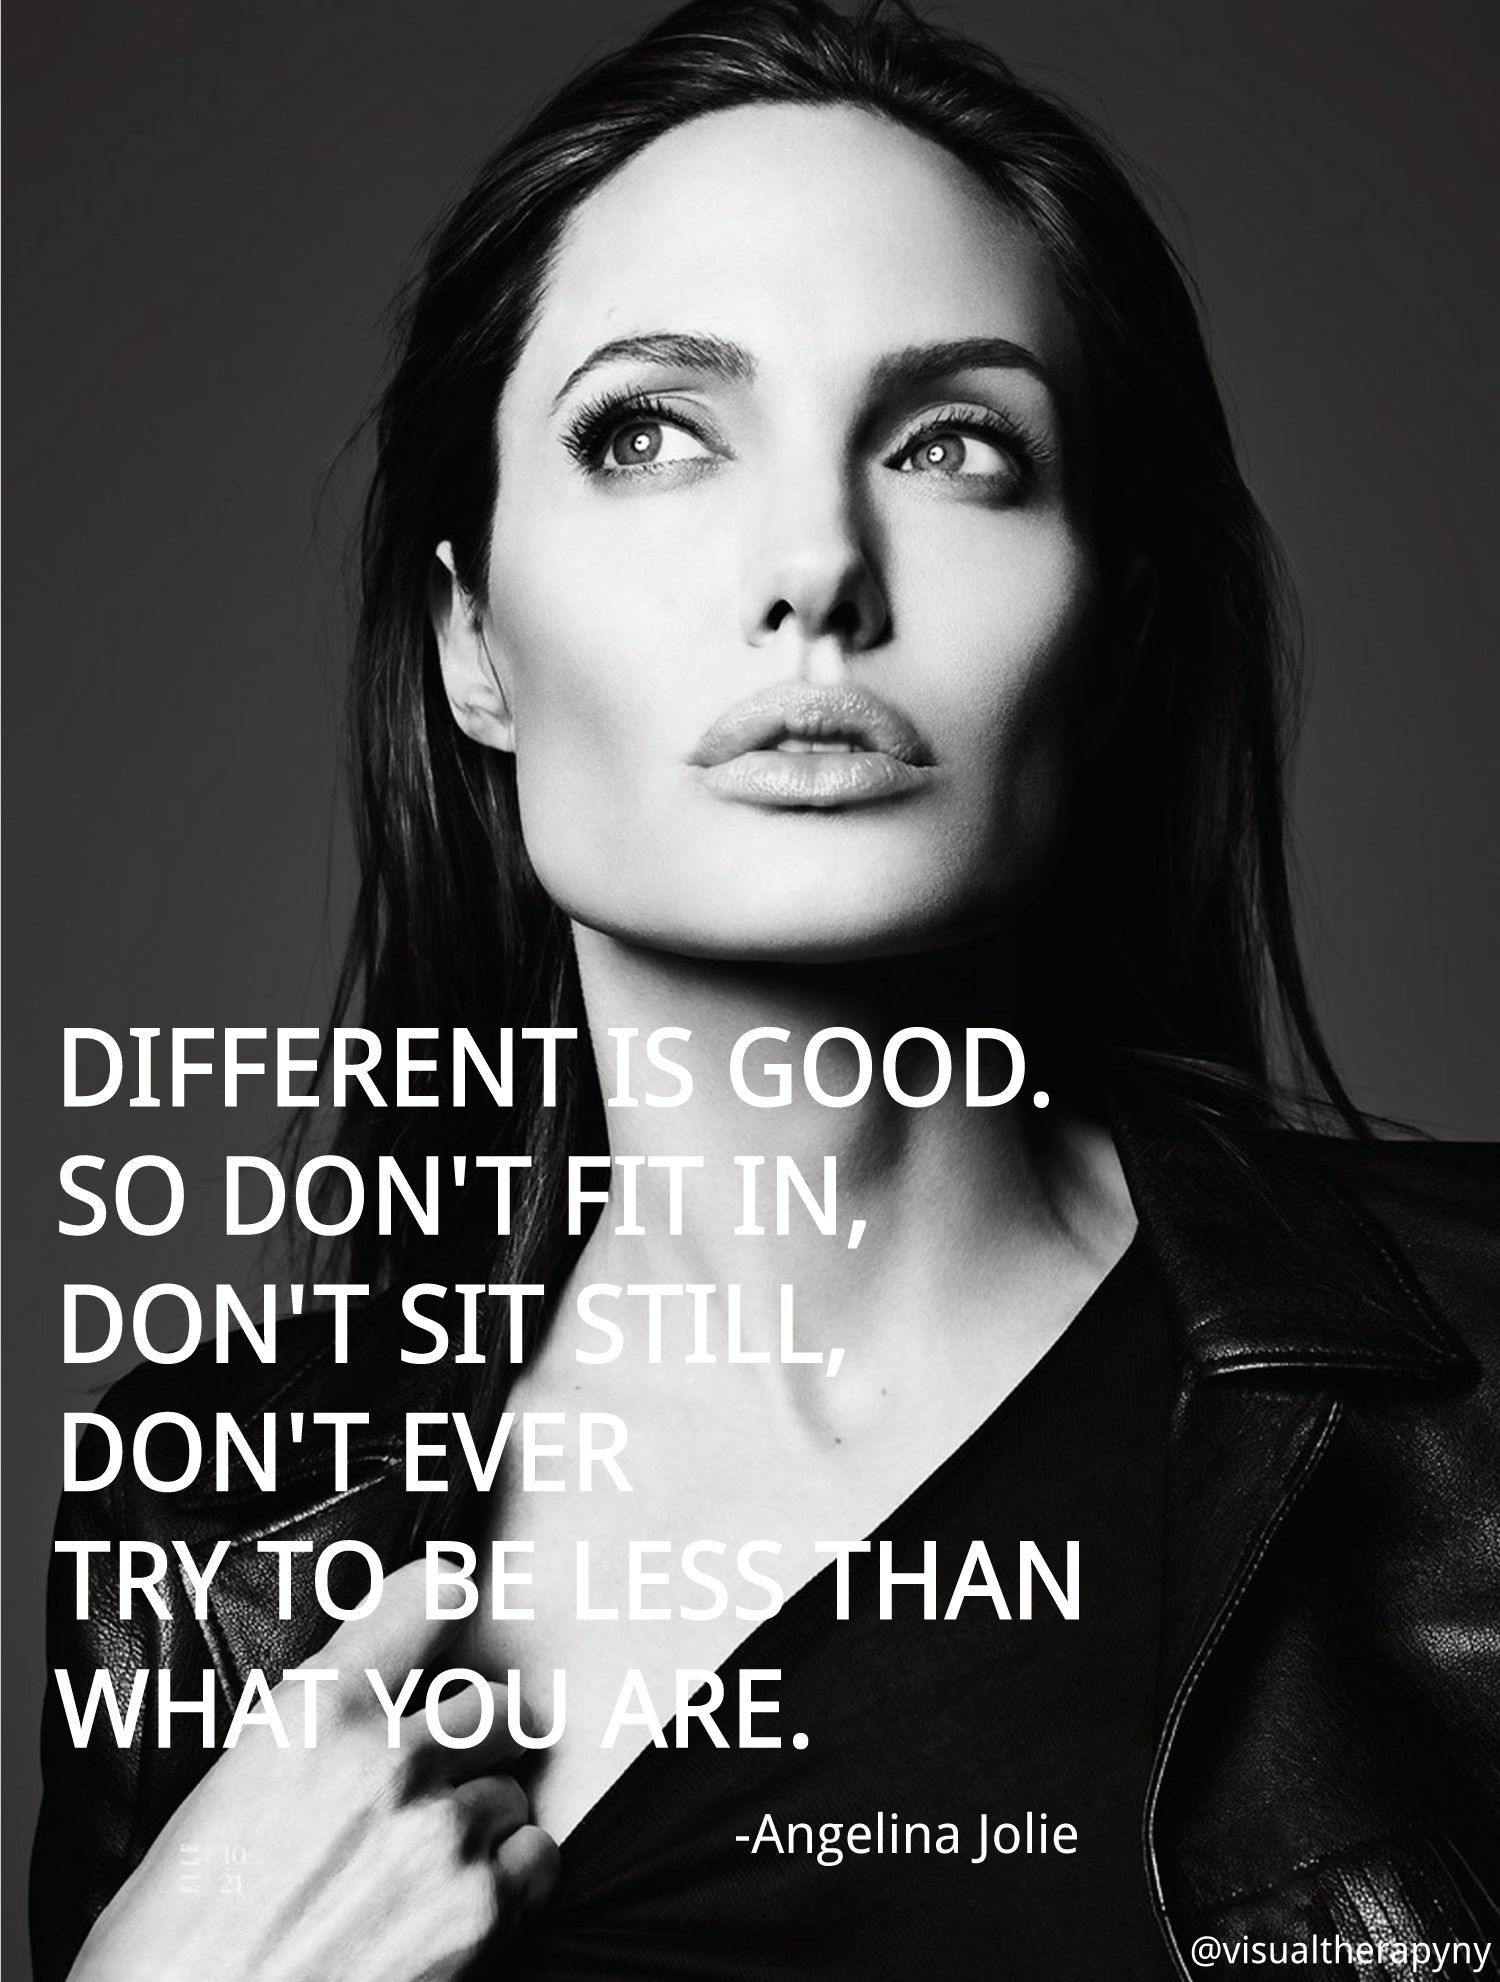 Angelina Jolie Quote | Visual Therapy